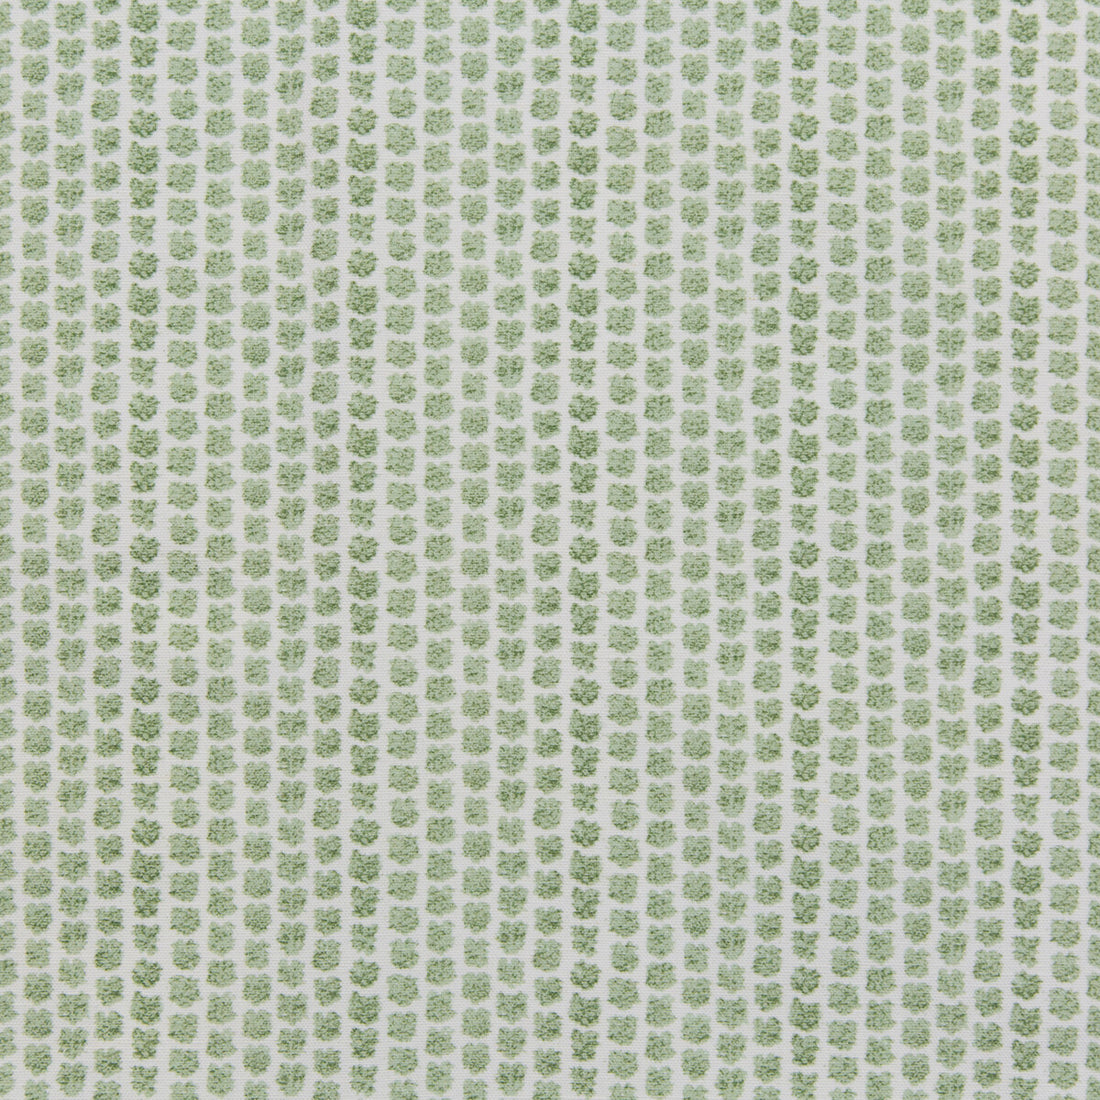 Kaya II fabric in leaf color - pattern 2017224.23.0 - by Lee Jofa in the Westport collection